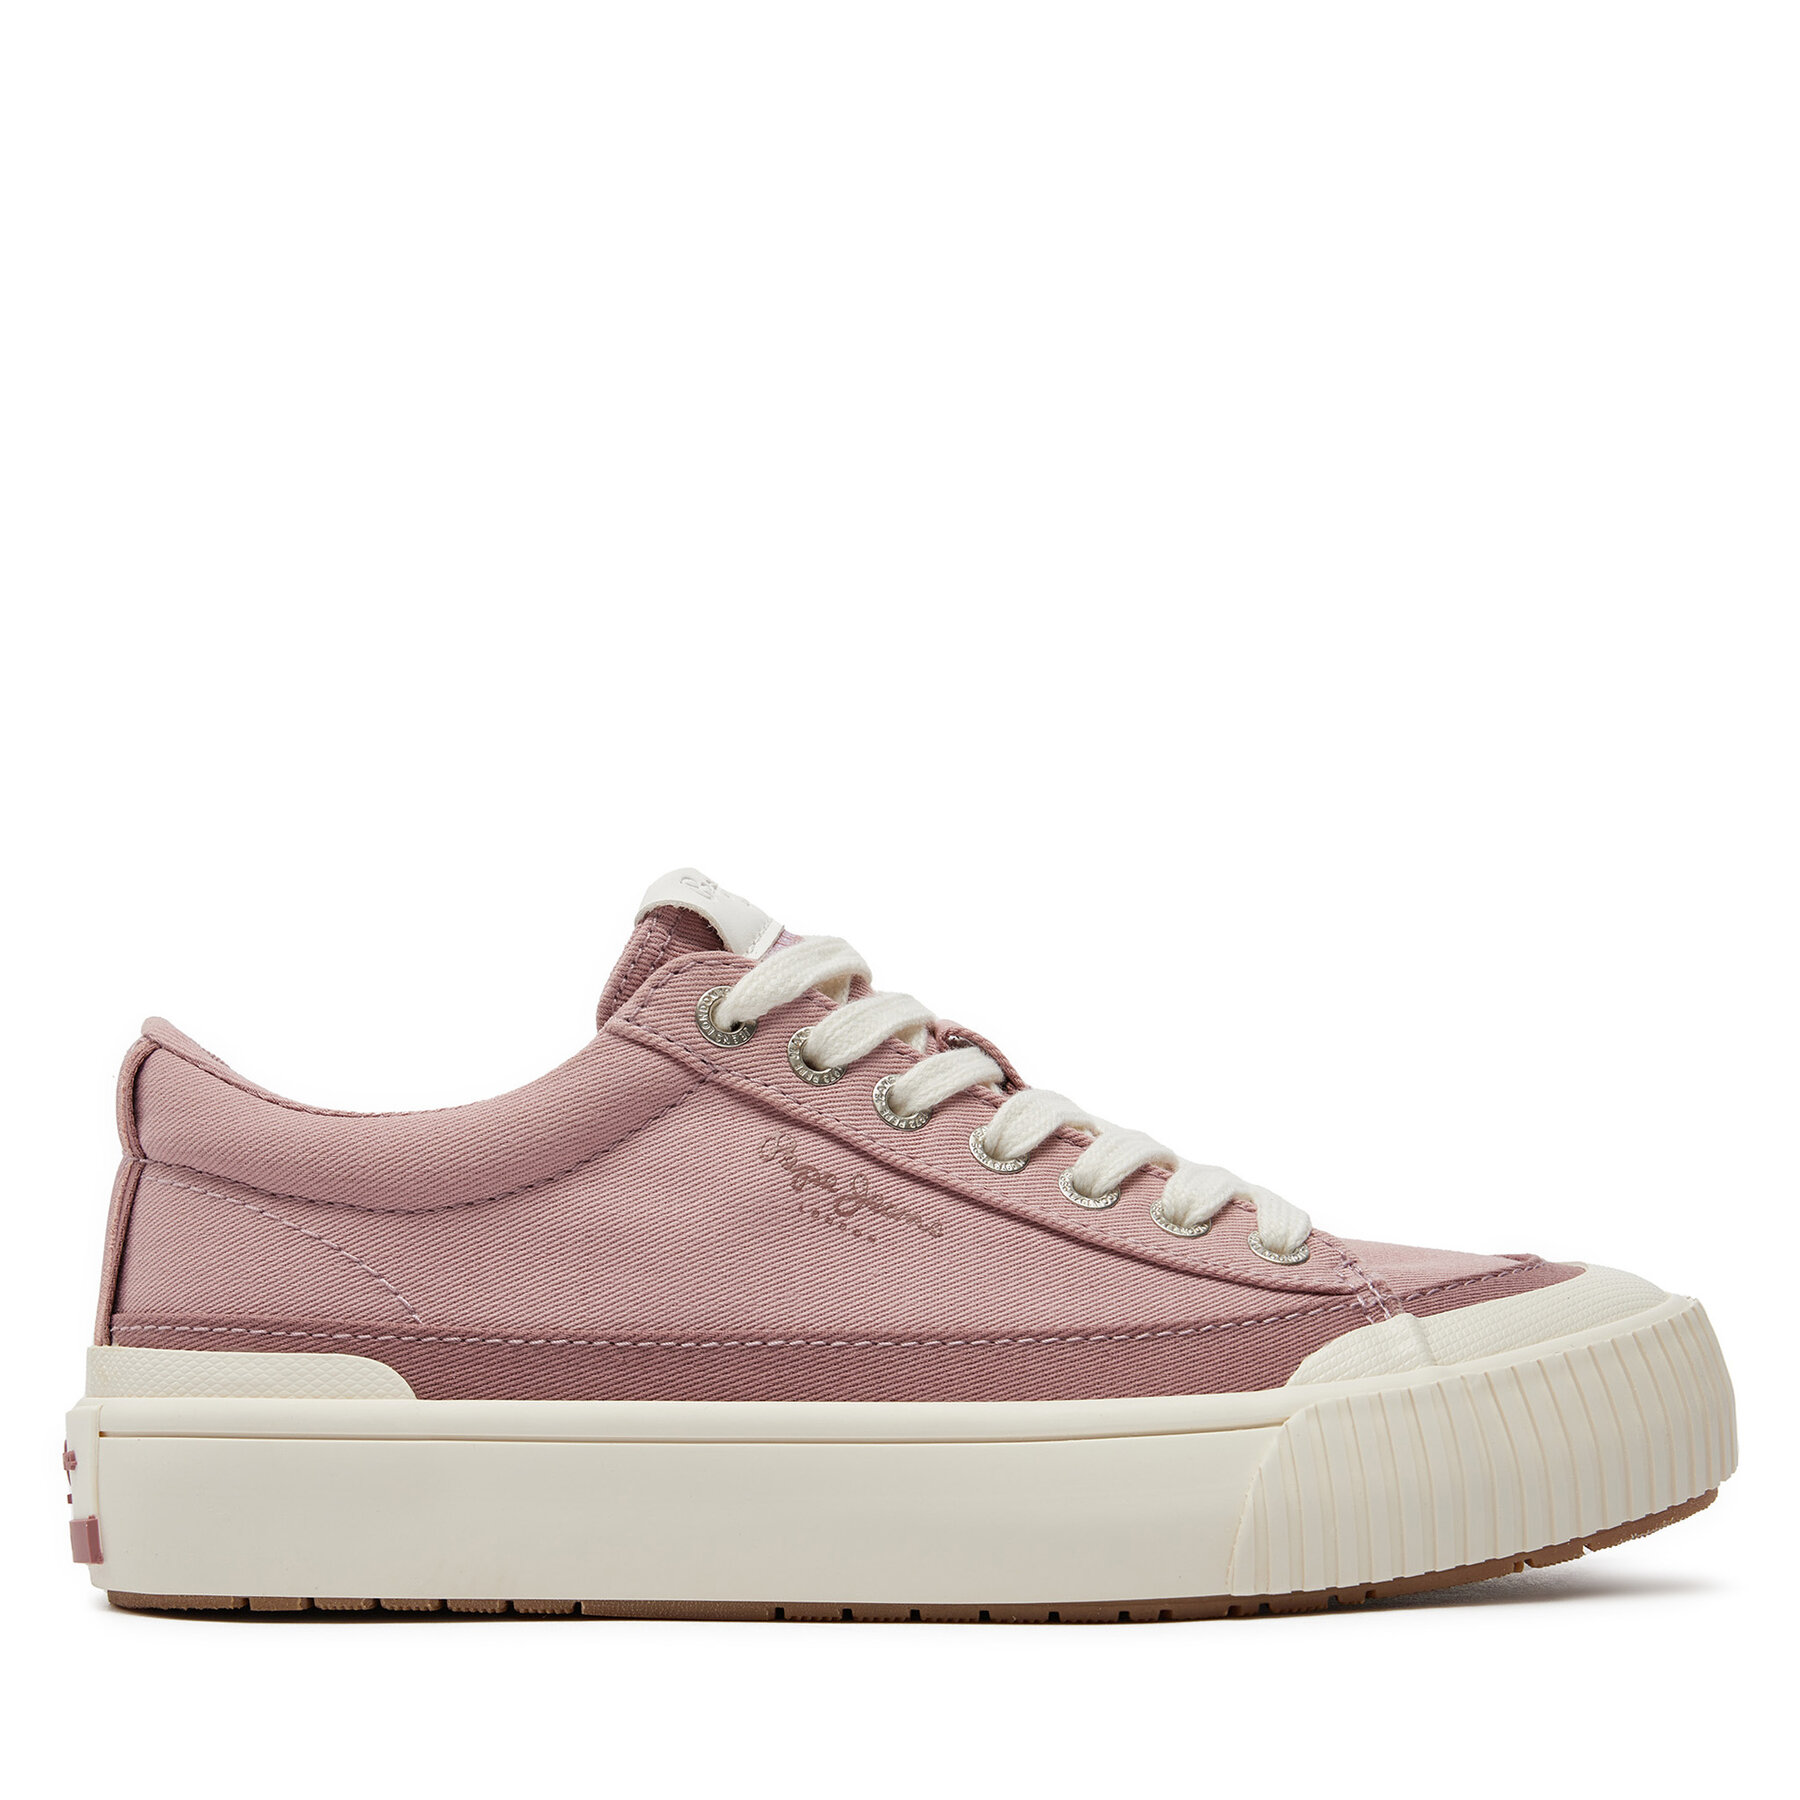 Sneakers Pepe Jeans Ben Road W PLS31558 Ash Rose Pink 323 von Pepe Jeans